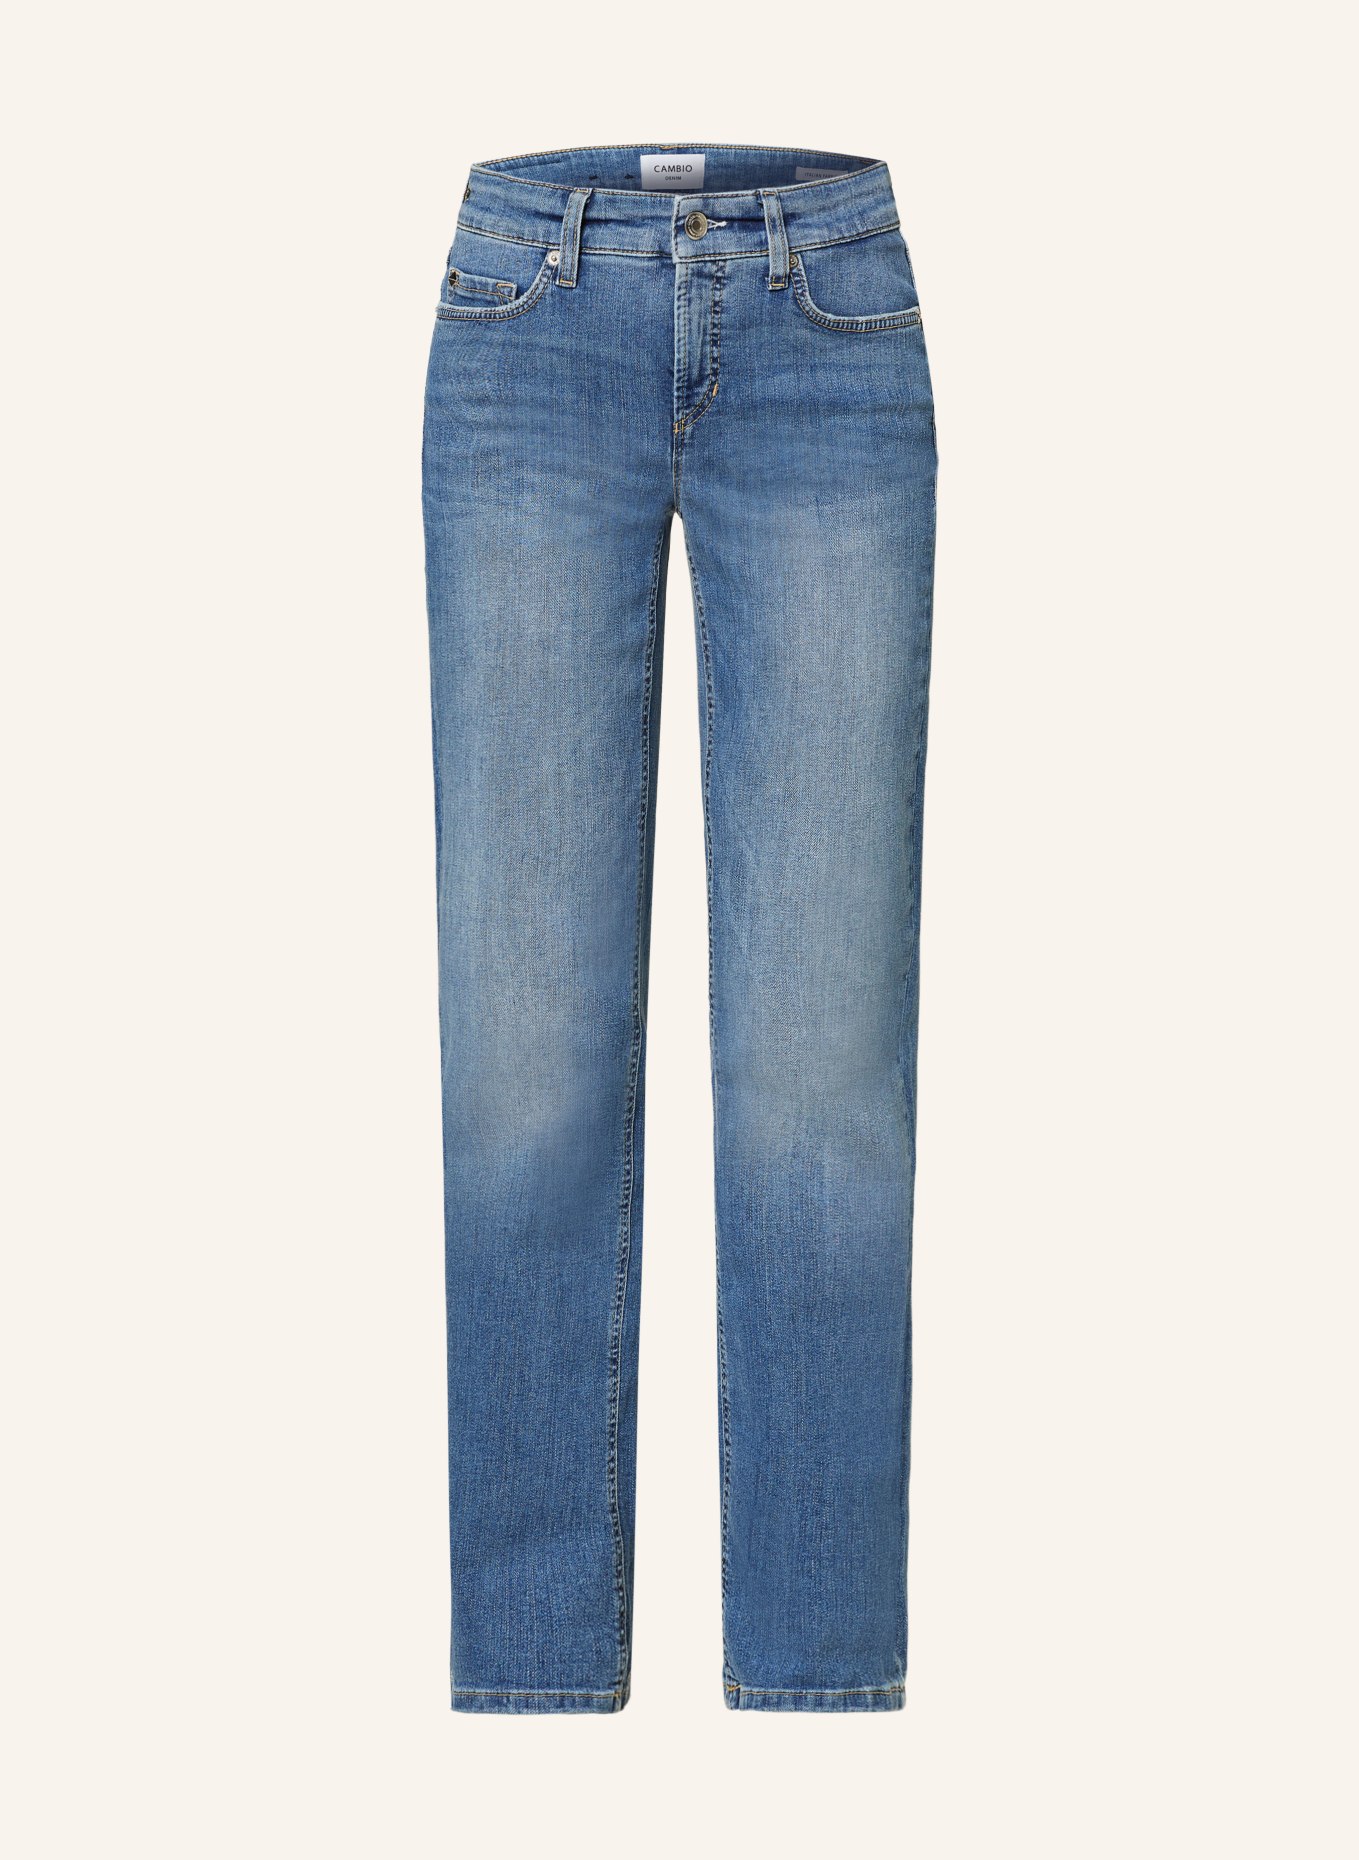 CAMBIO Jeans PIPER, Color: 5249 contrast used (Image 1)